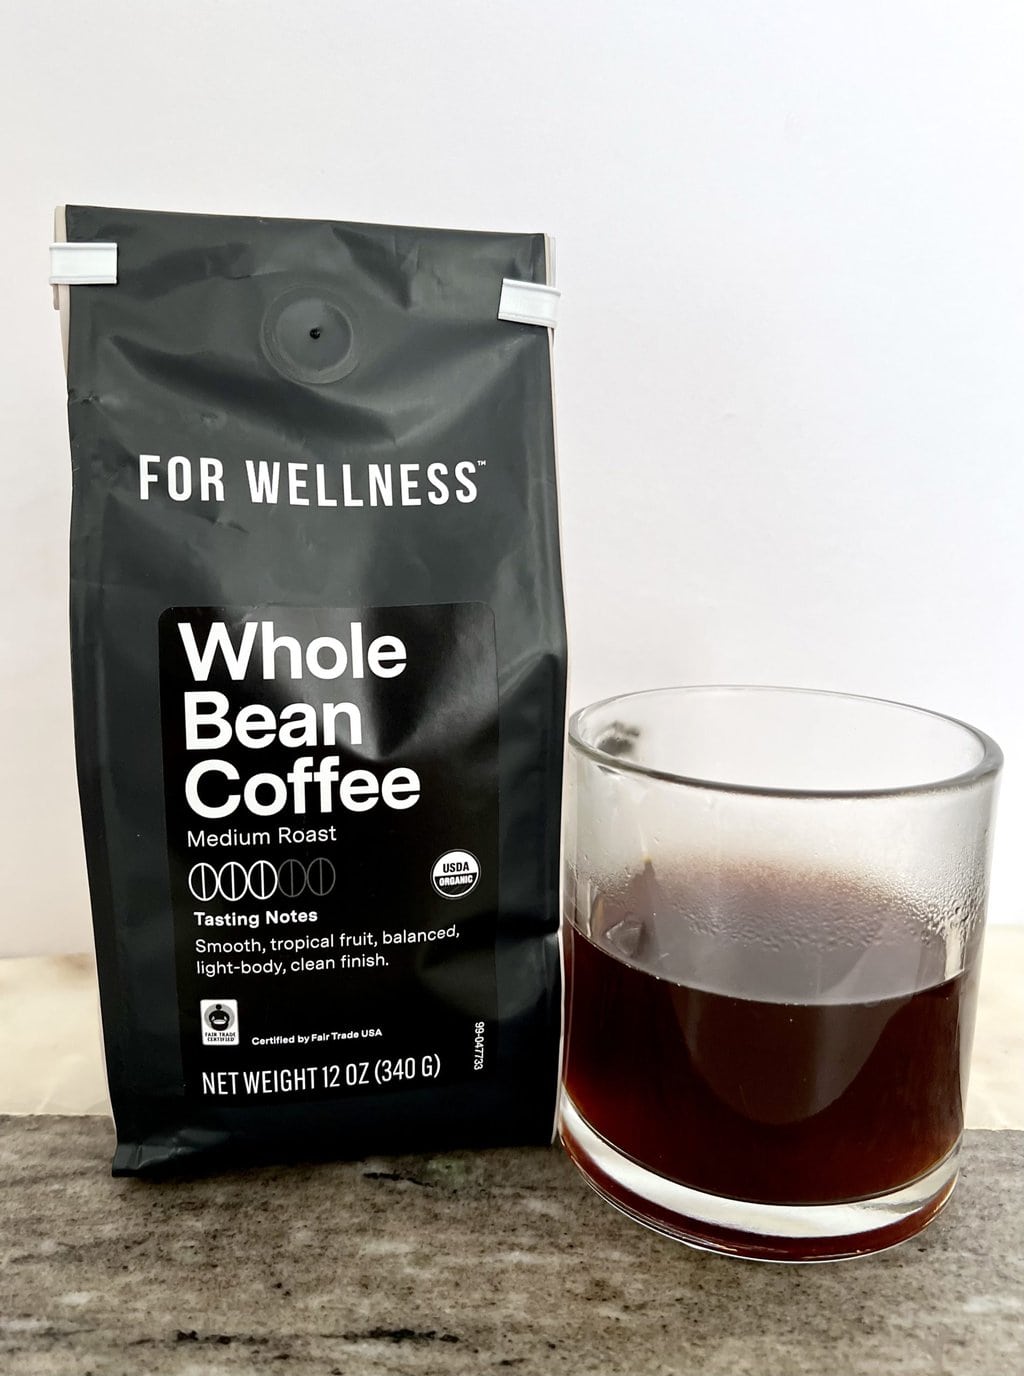 A pack of For Wellness Whole Bean Coffee Medium Roast Coffee stands next to a brewed cup of coffee 